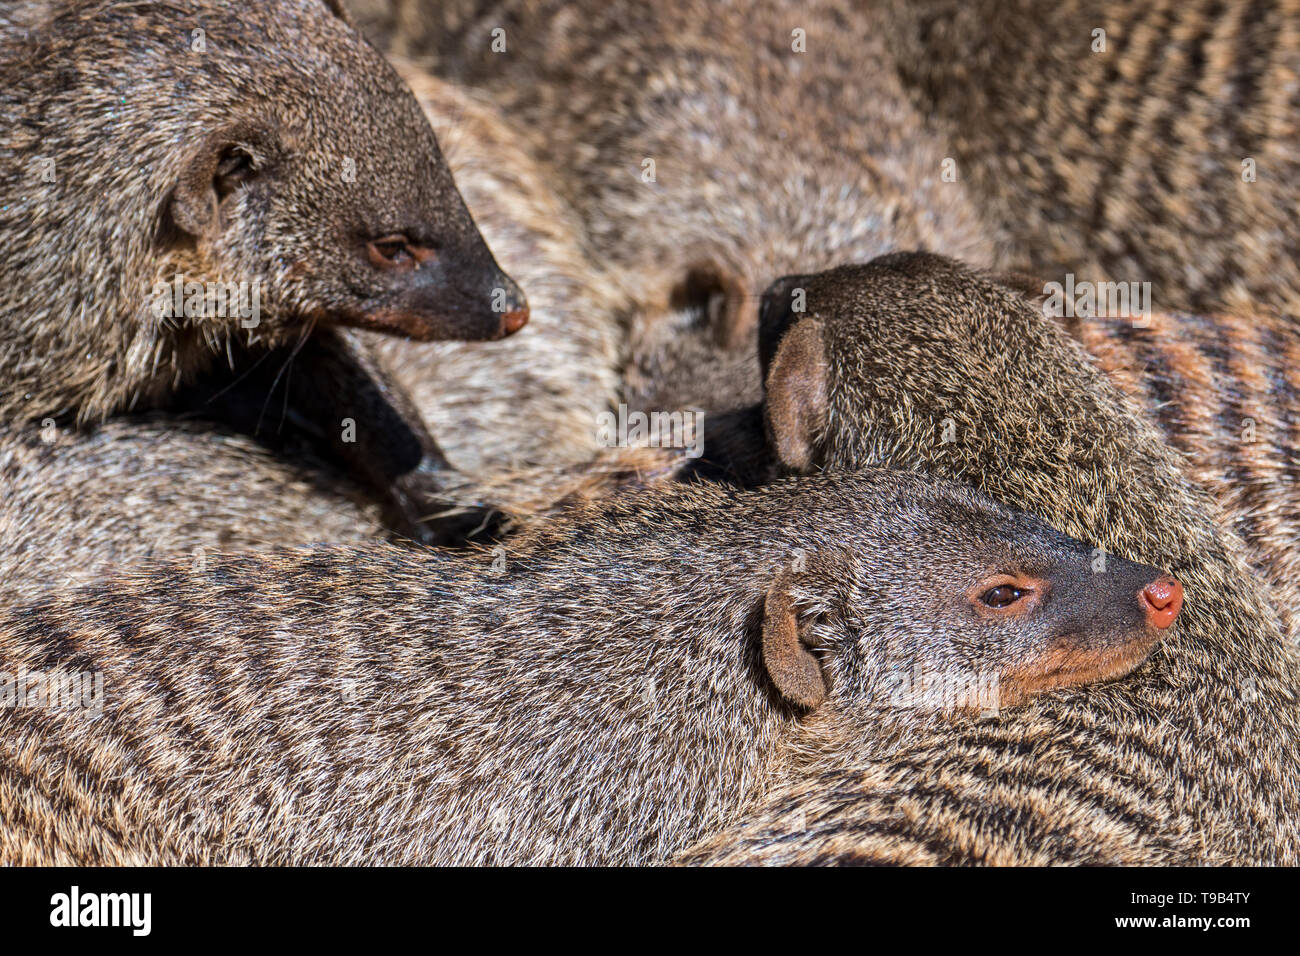 Snuggling banded mongooses (Mungos mungo) sleeping / resting huddled together in banded mongoose colony, native to Africa Stock Photo